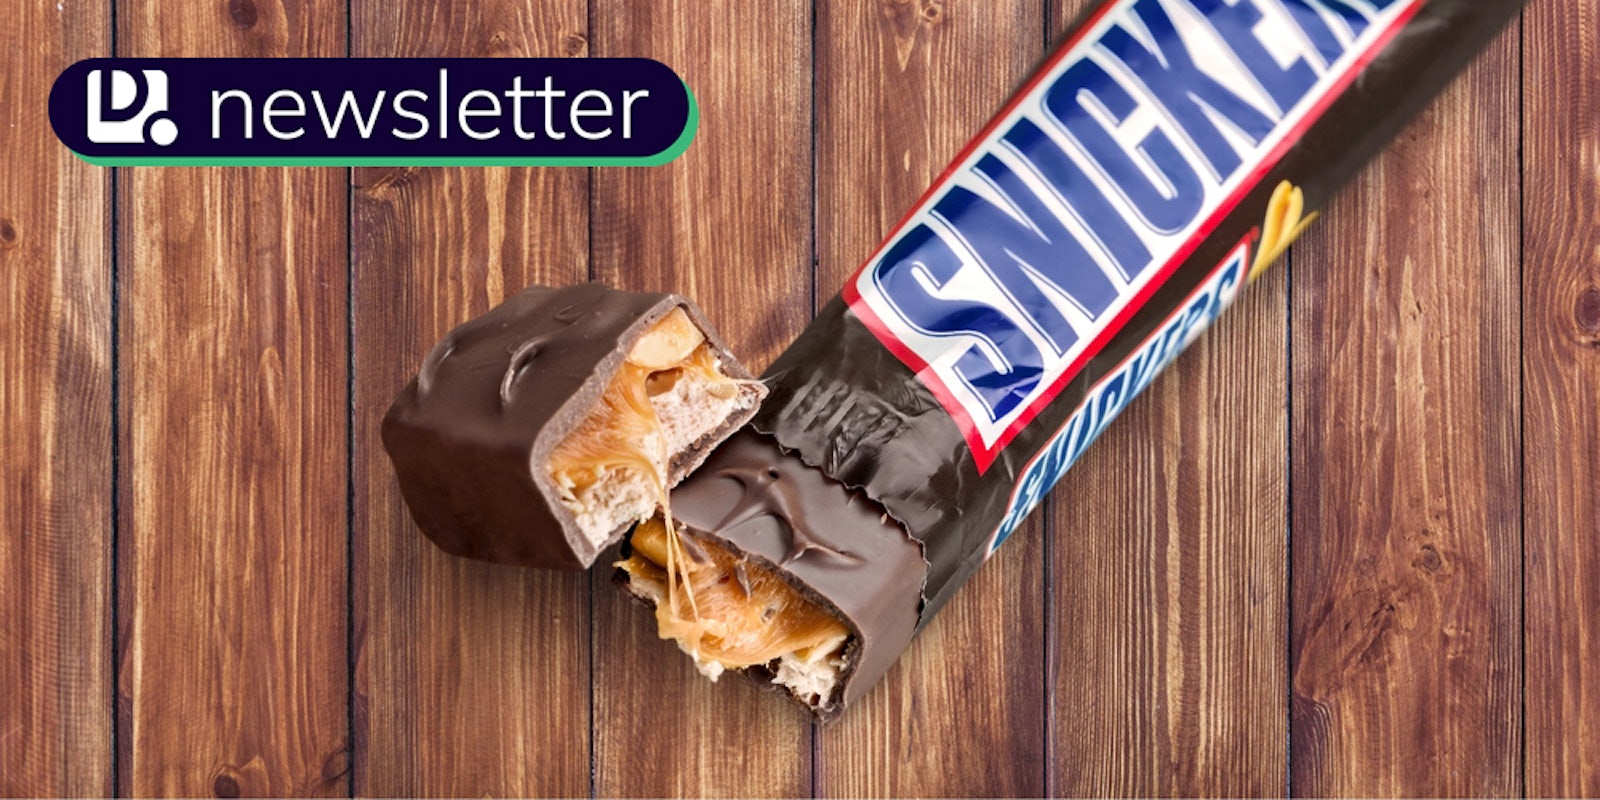 A Snickers bar. In the top left corner is the Daily Dot newsletter logo.